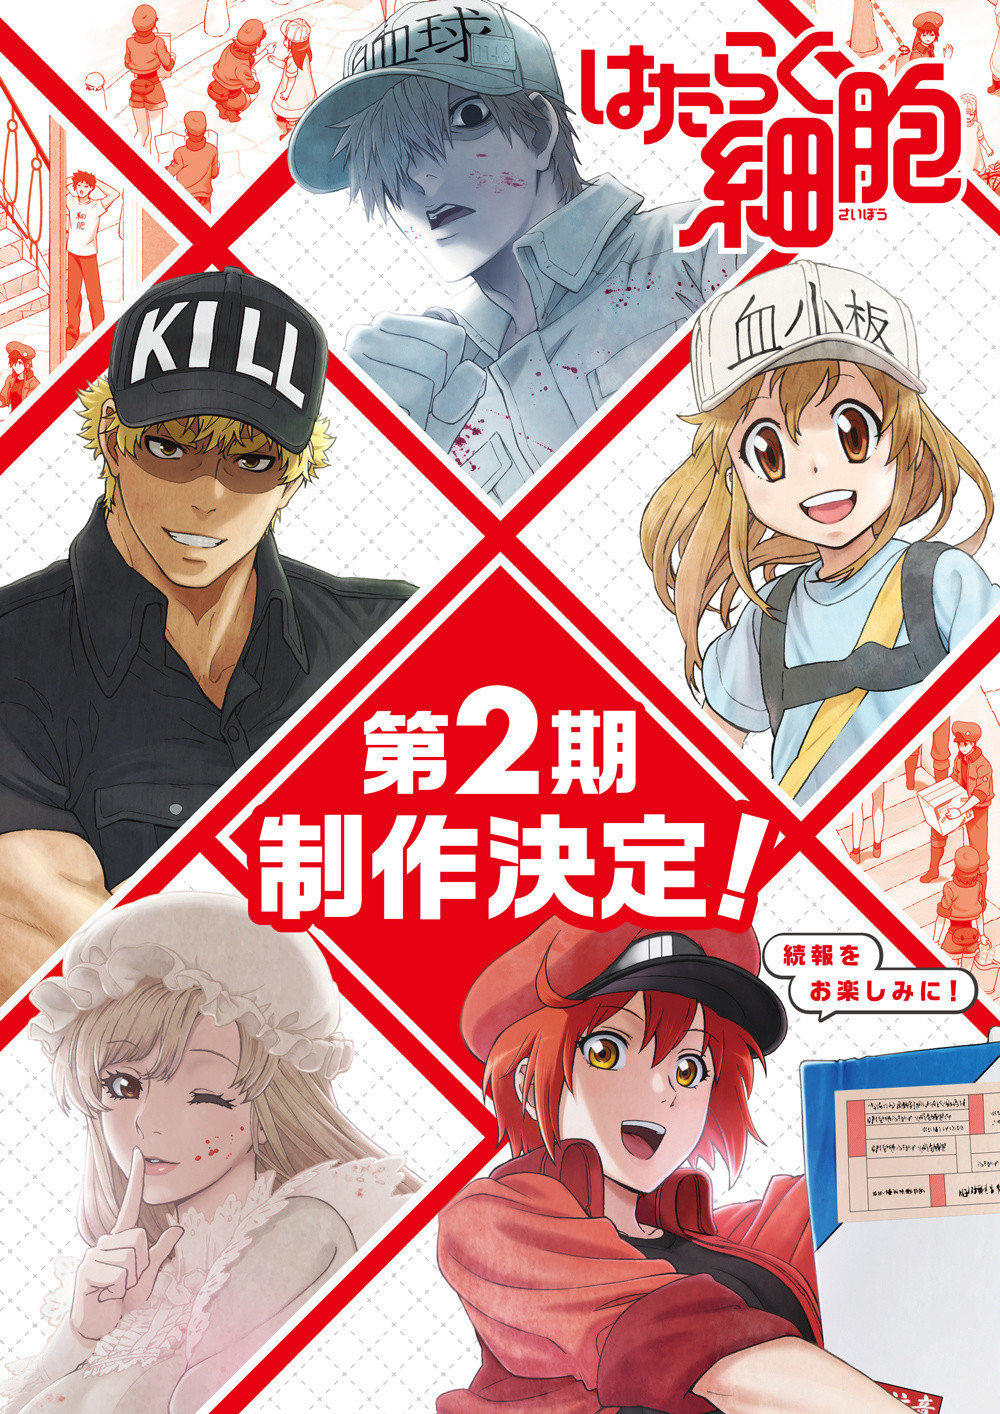 Cells at Work! Will be Back For Season 2!, Anime News